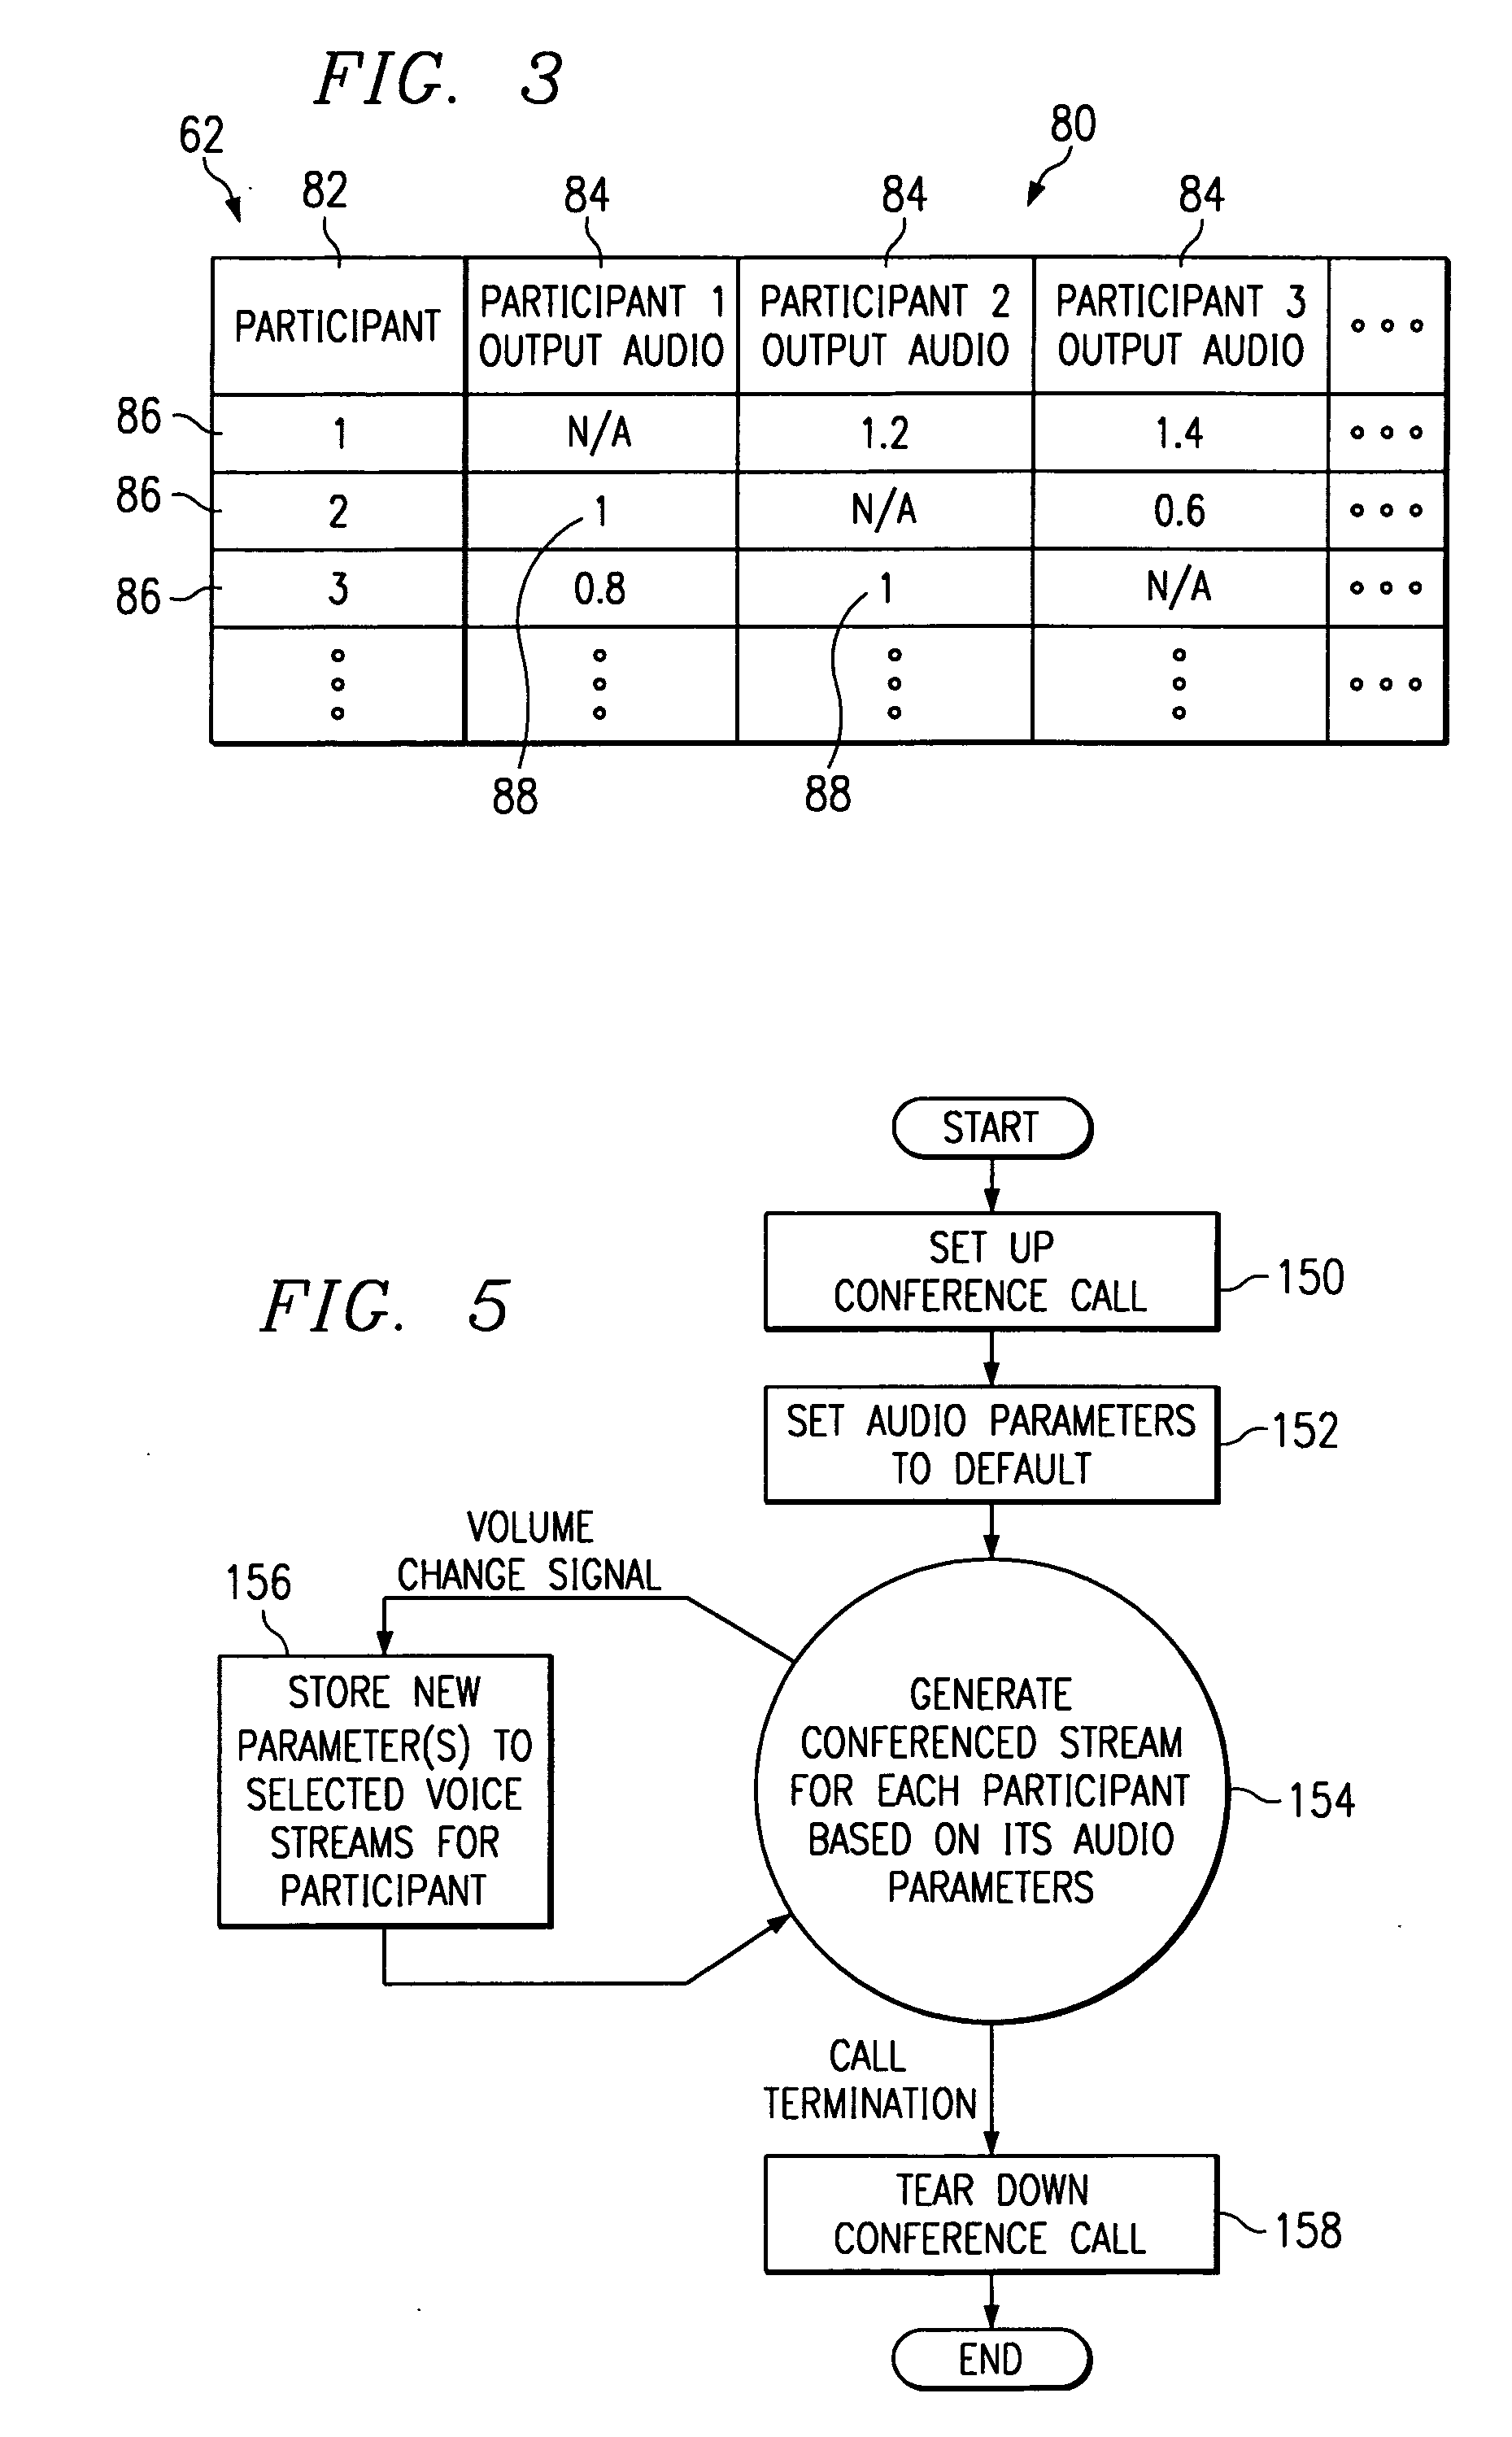 Method and system for independent participant control of audio during multiparty communication sessions